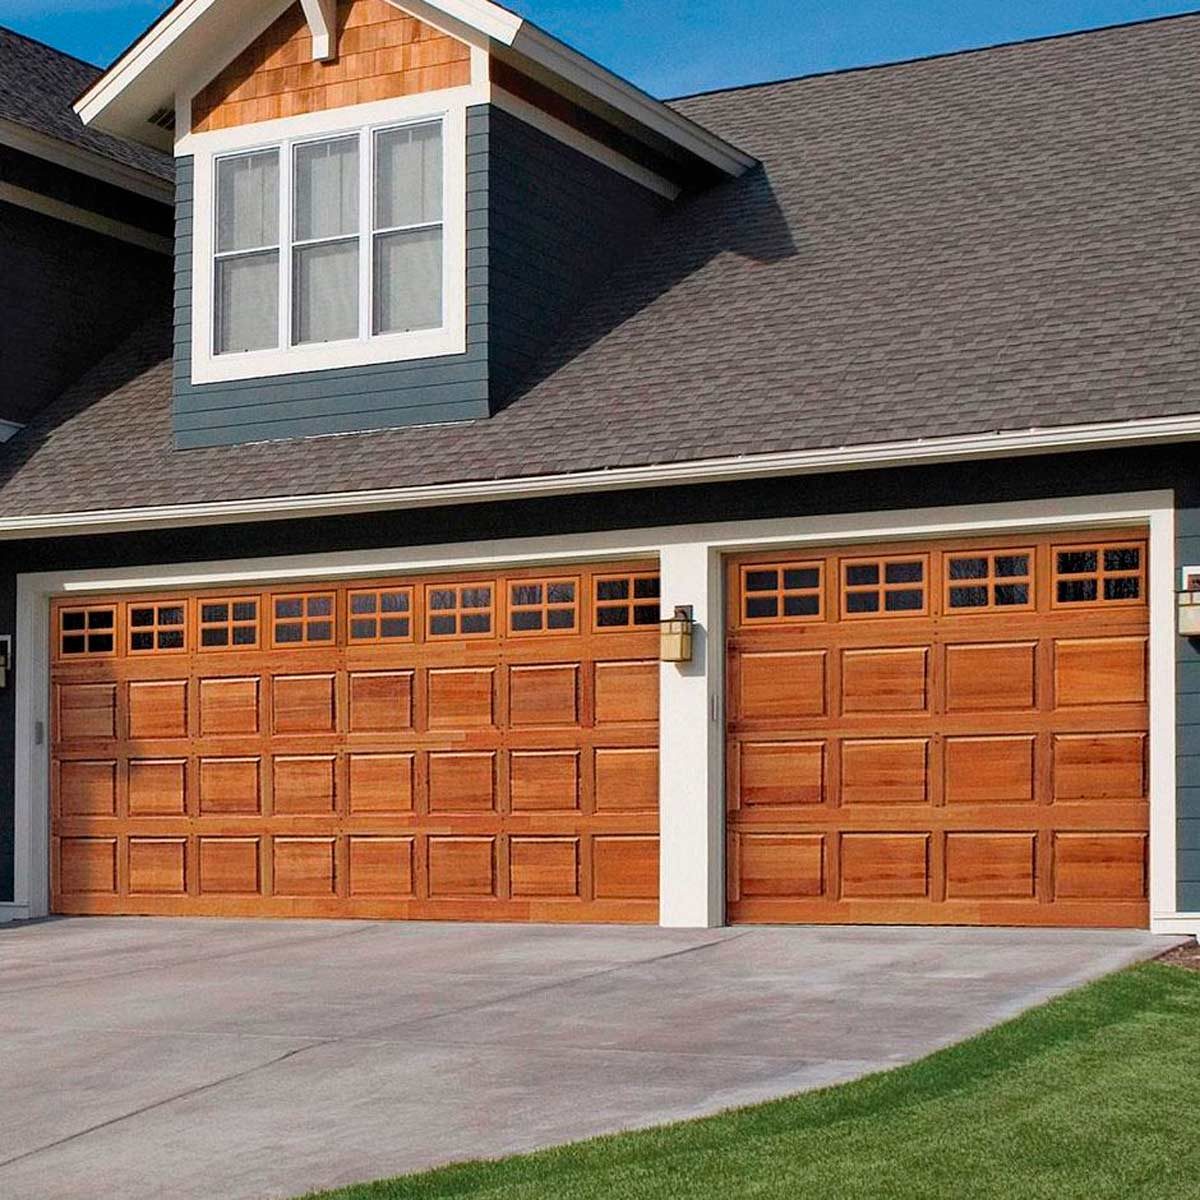 Creatice Garage Door Color Match for Large Space